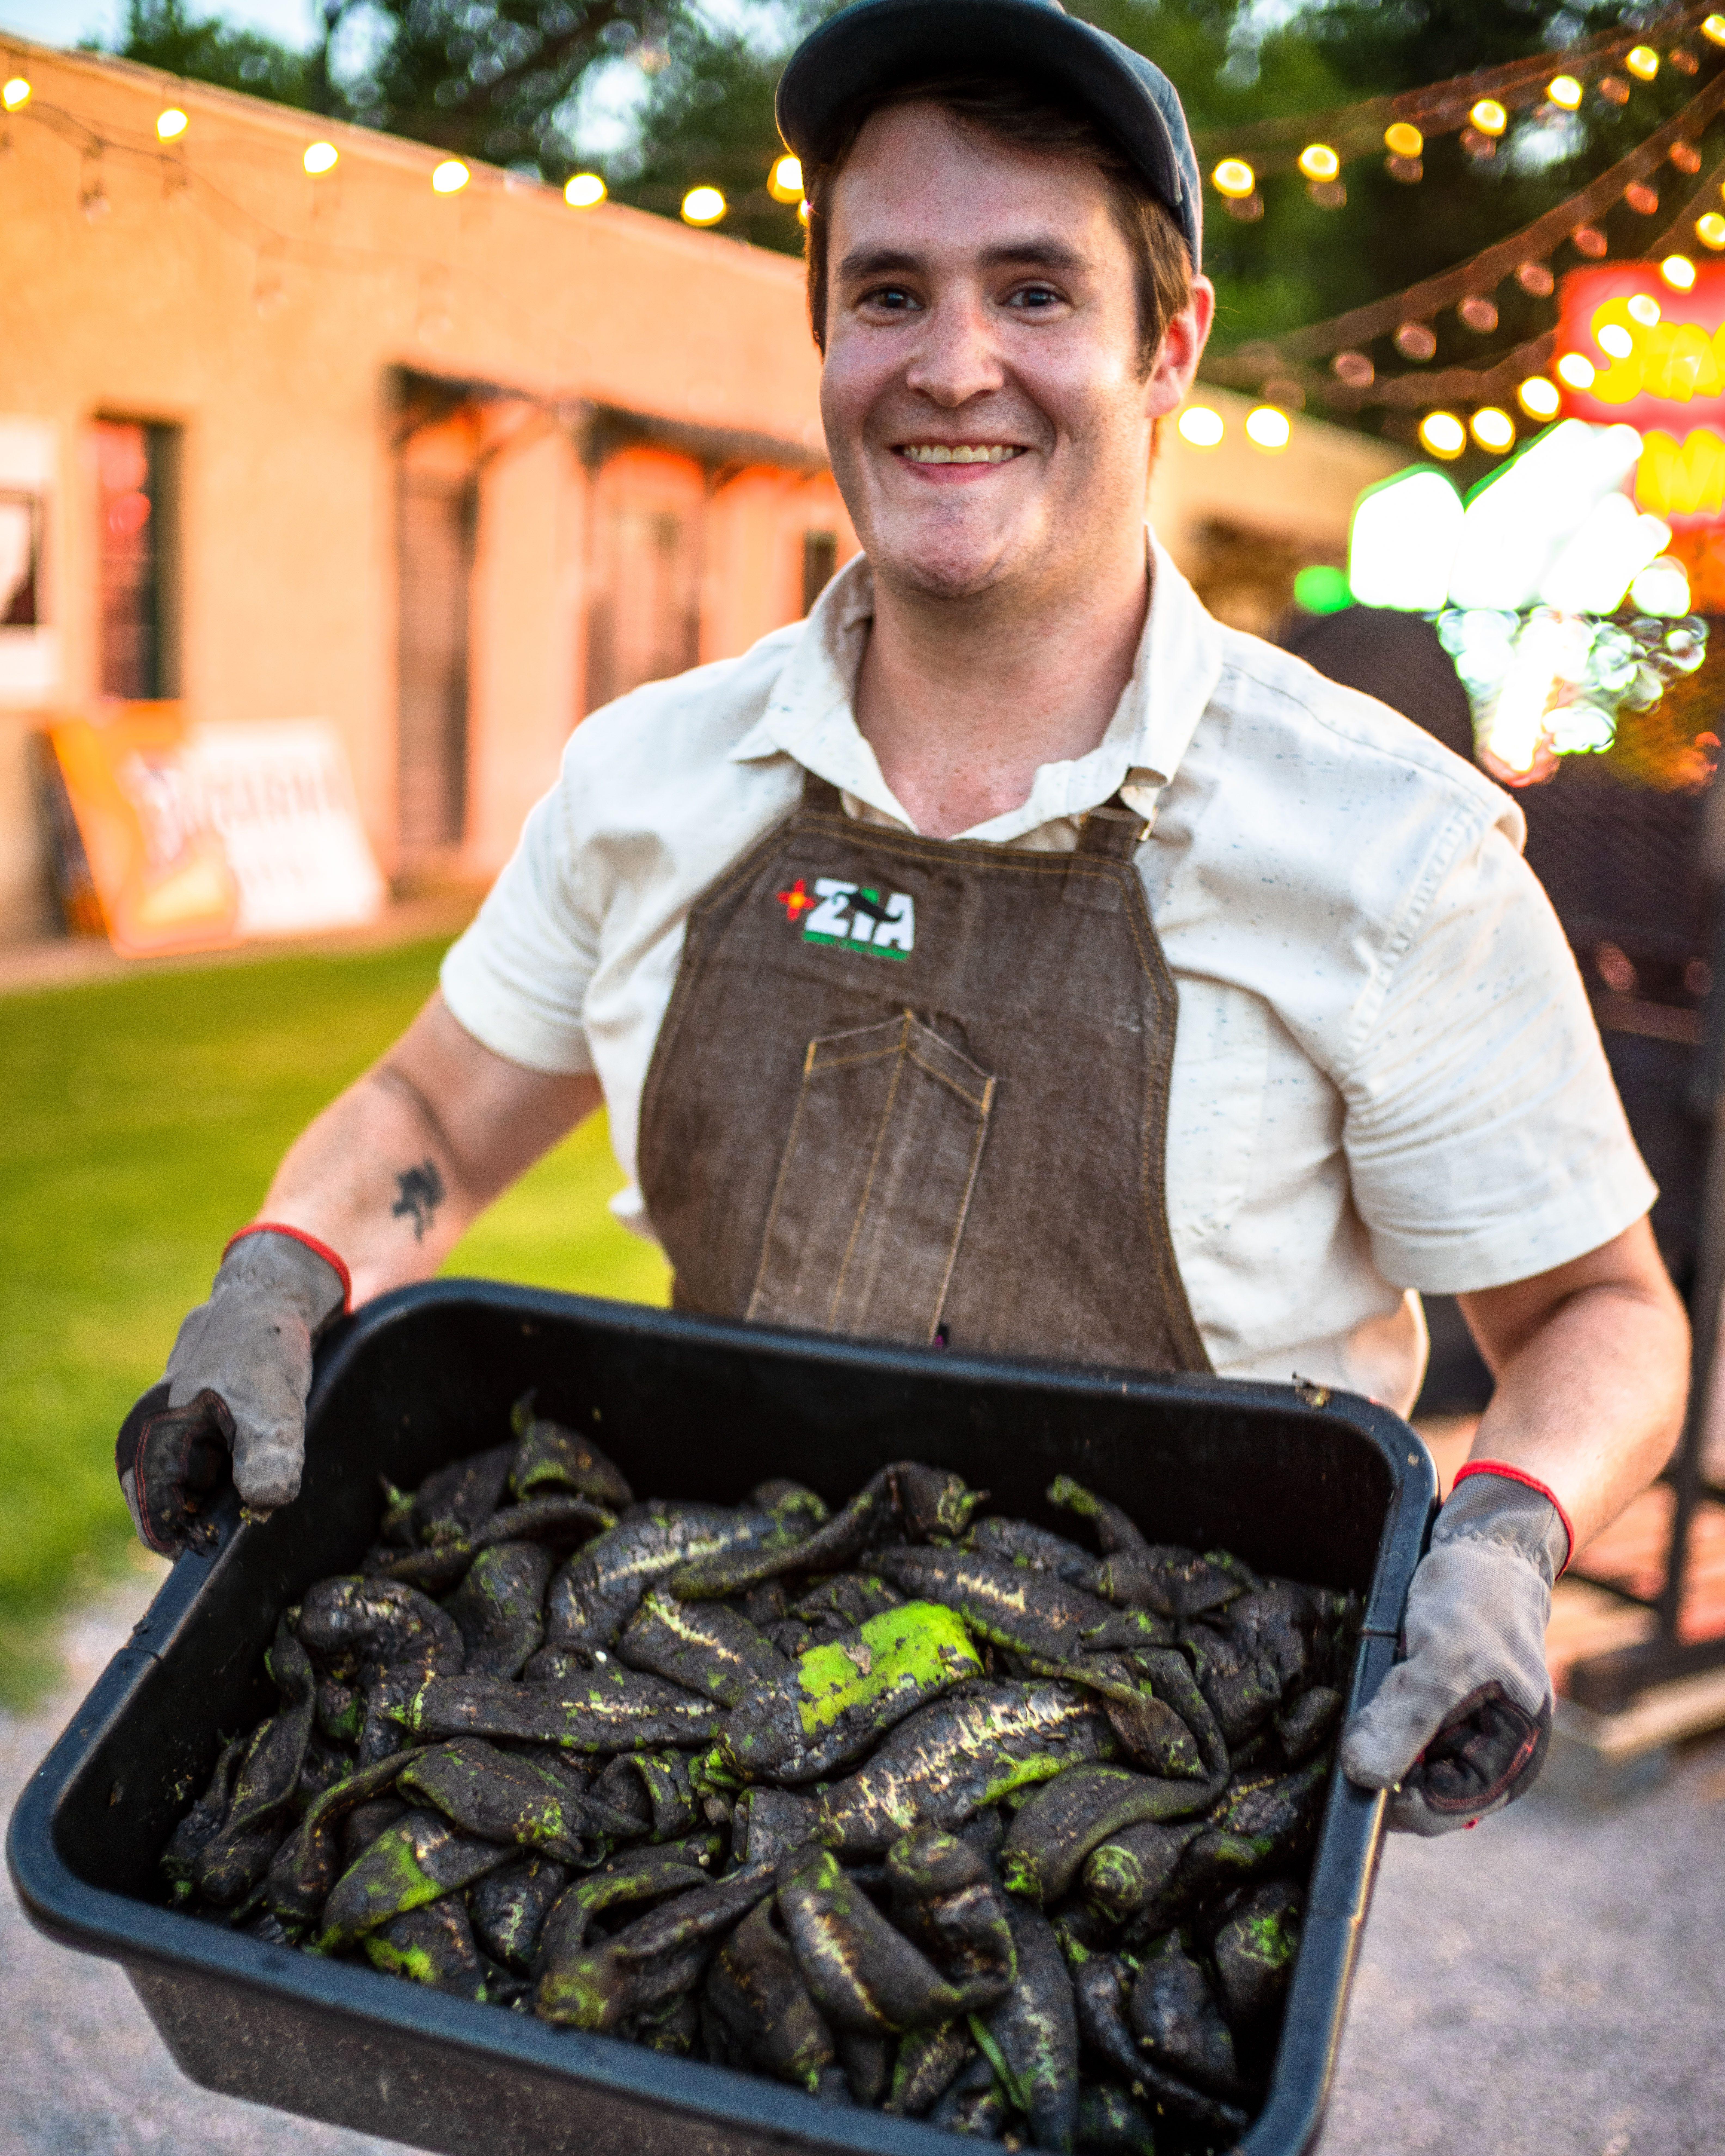 Nathaniel Cotanch, founder of the Zia Hatch Chile Company, carries a tub of freshly roasted green chile in Hatch in July 2020.